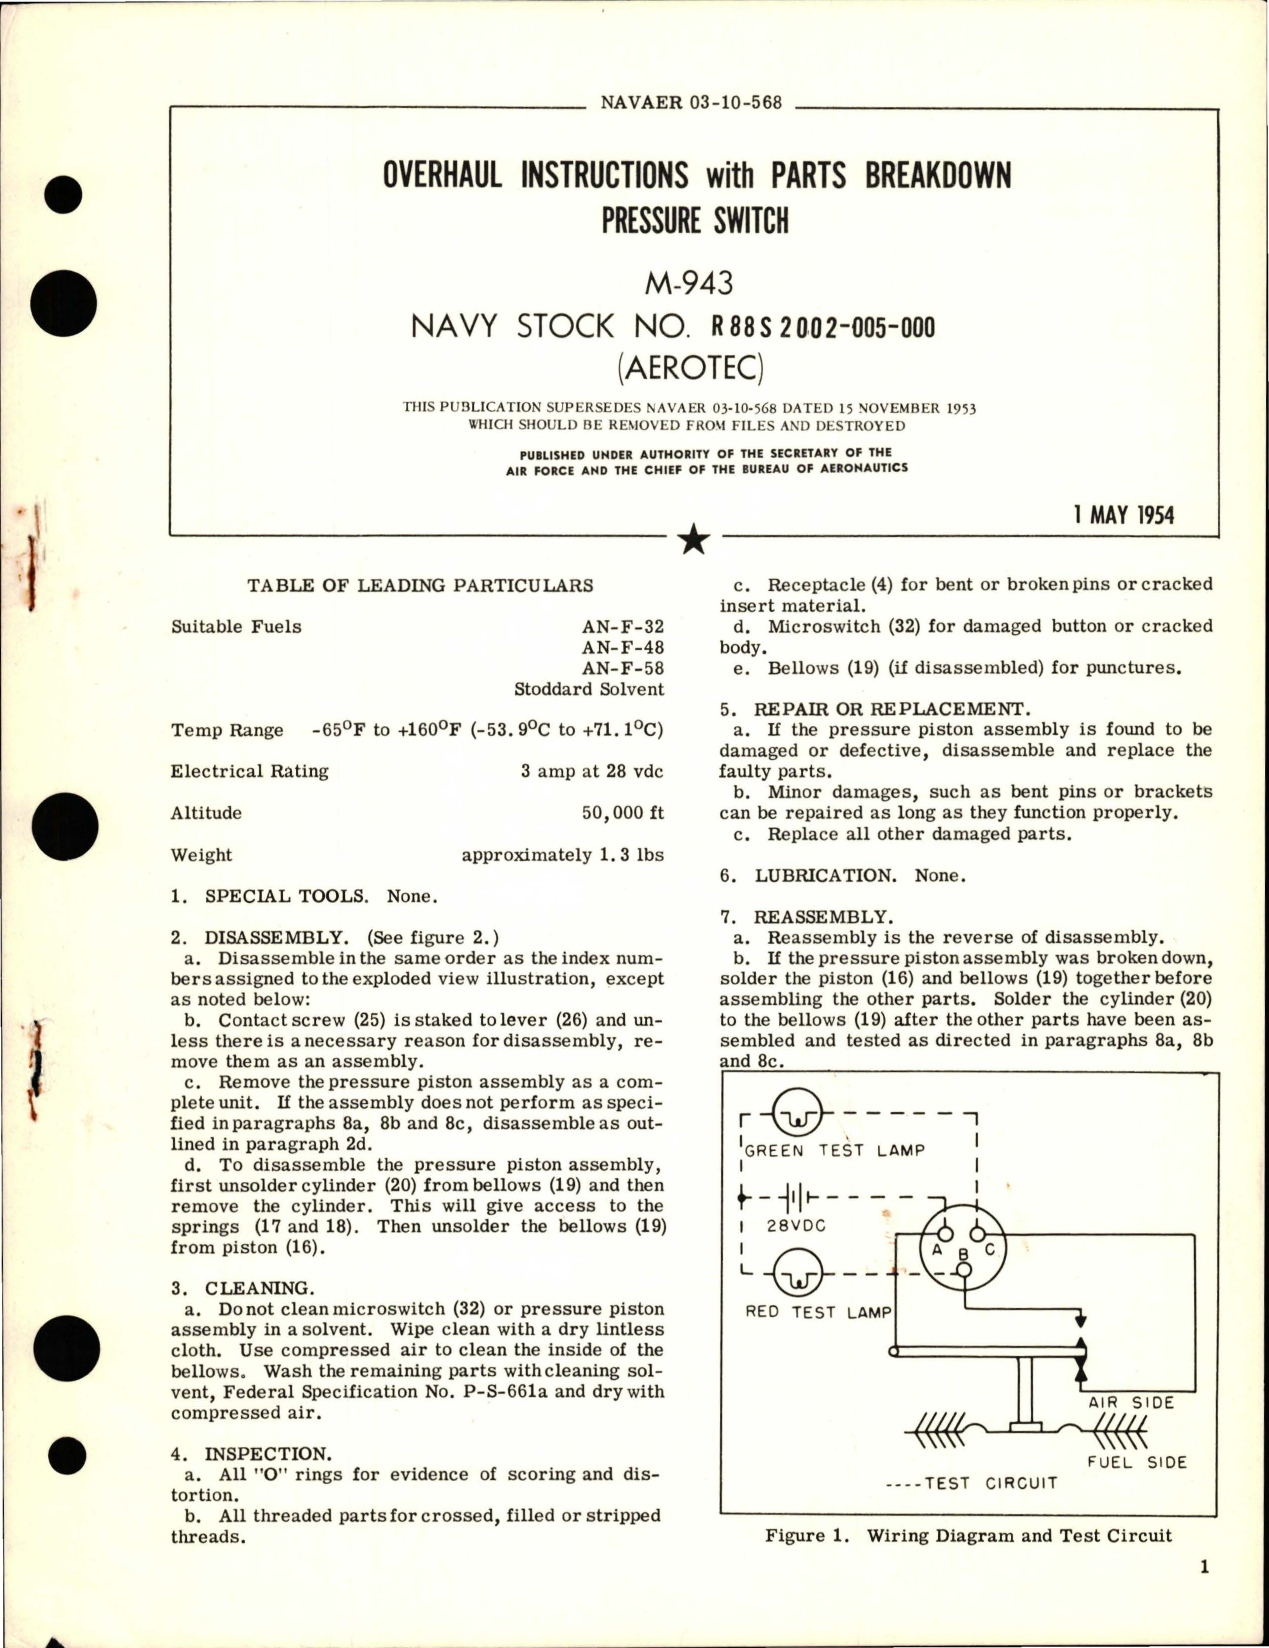 Sample page 1 from AirCorps Library document: Overhaul Instructions with Parts Breakdown for Pressure Switch - M-943 